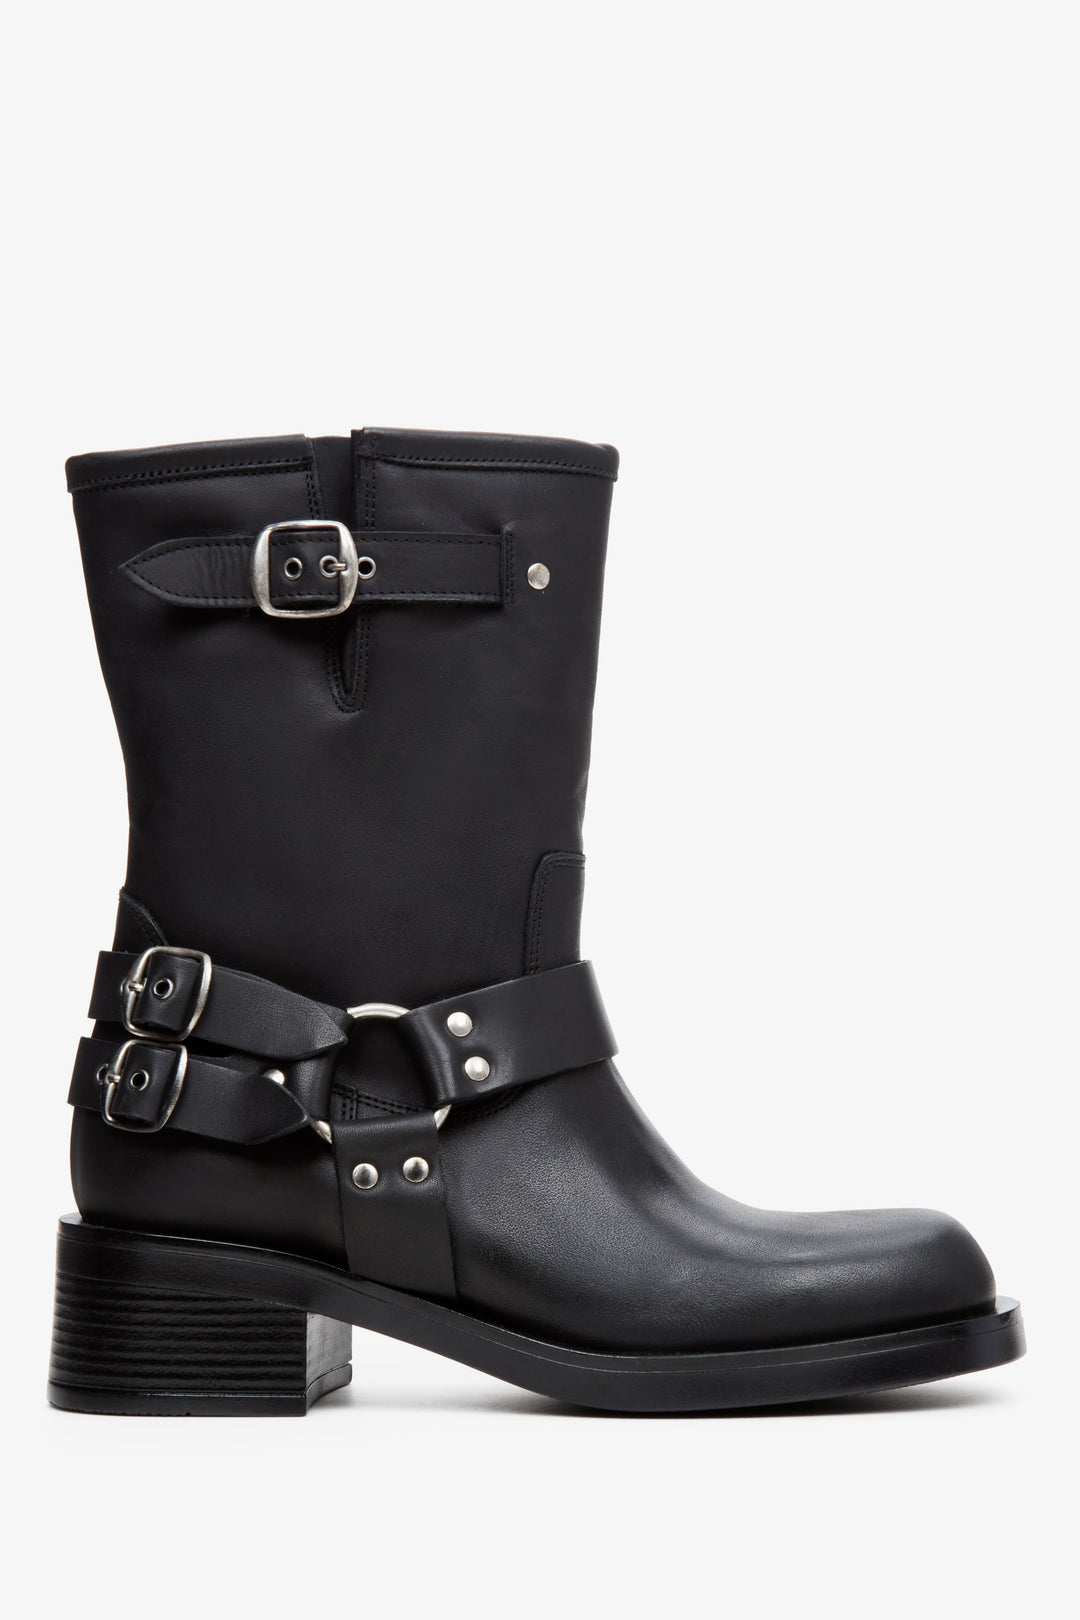 Women's Black Boots made of Italian Genuine Leather with Jet Embellishments Estro ER00113601.